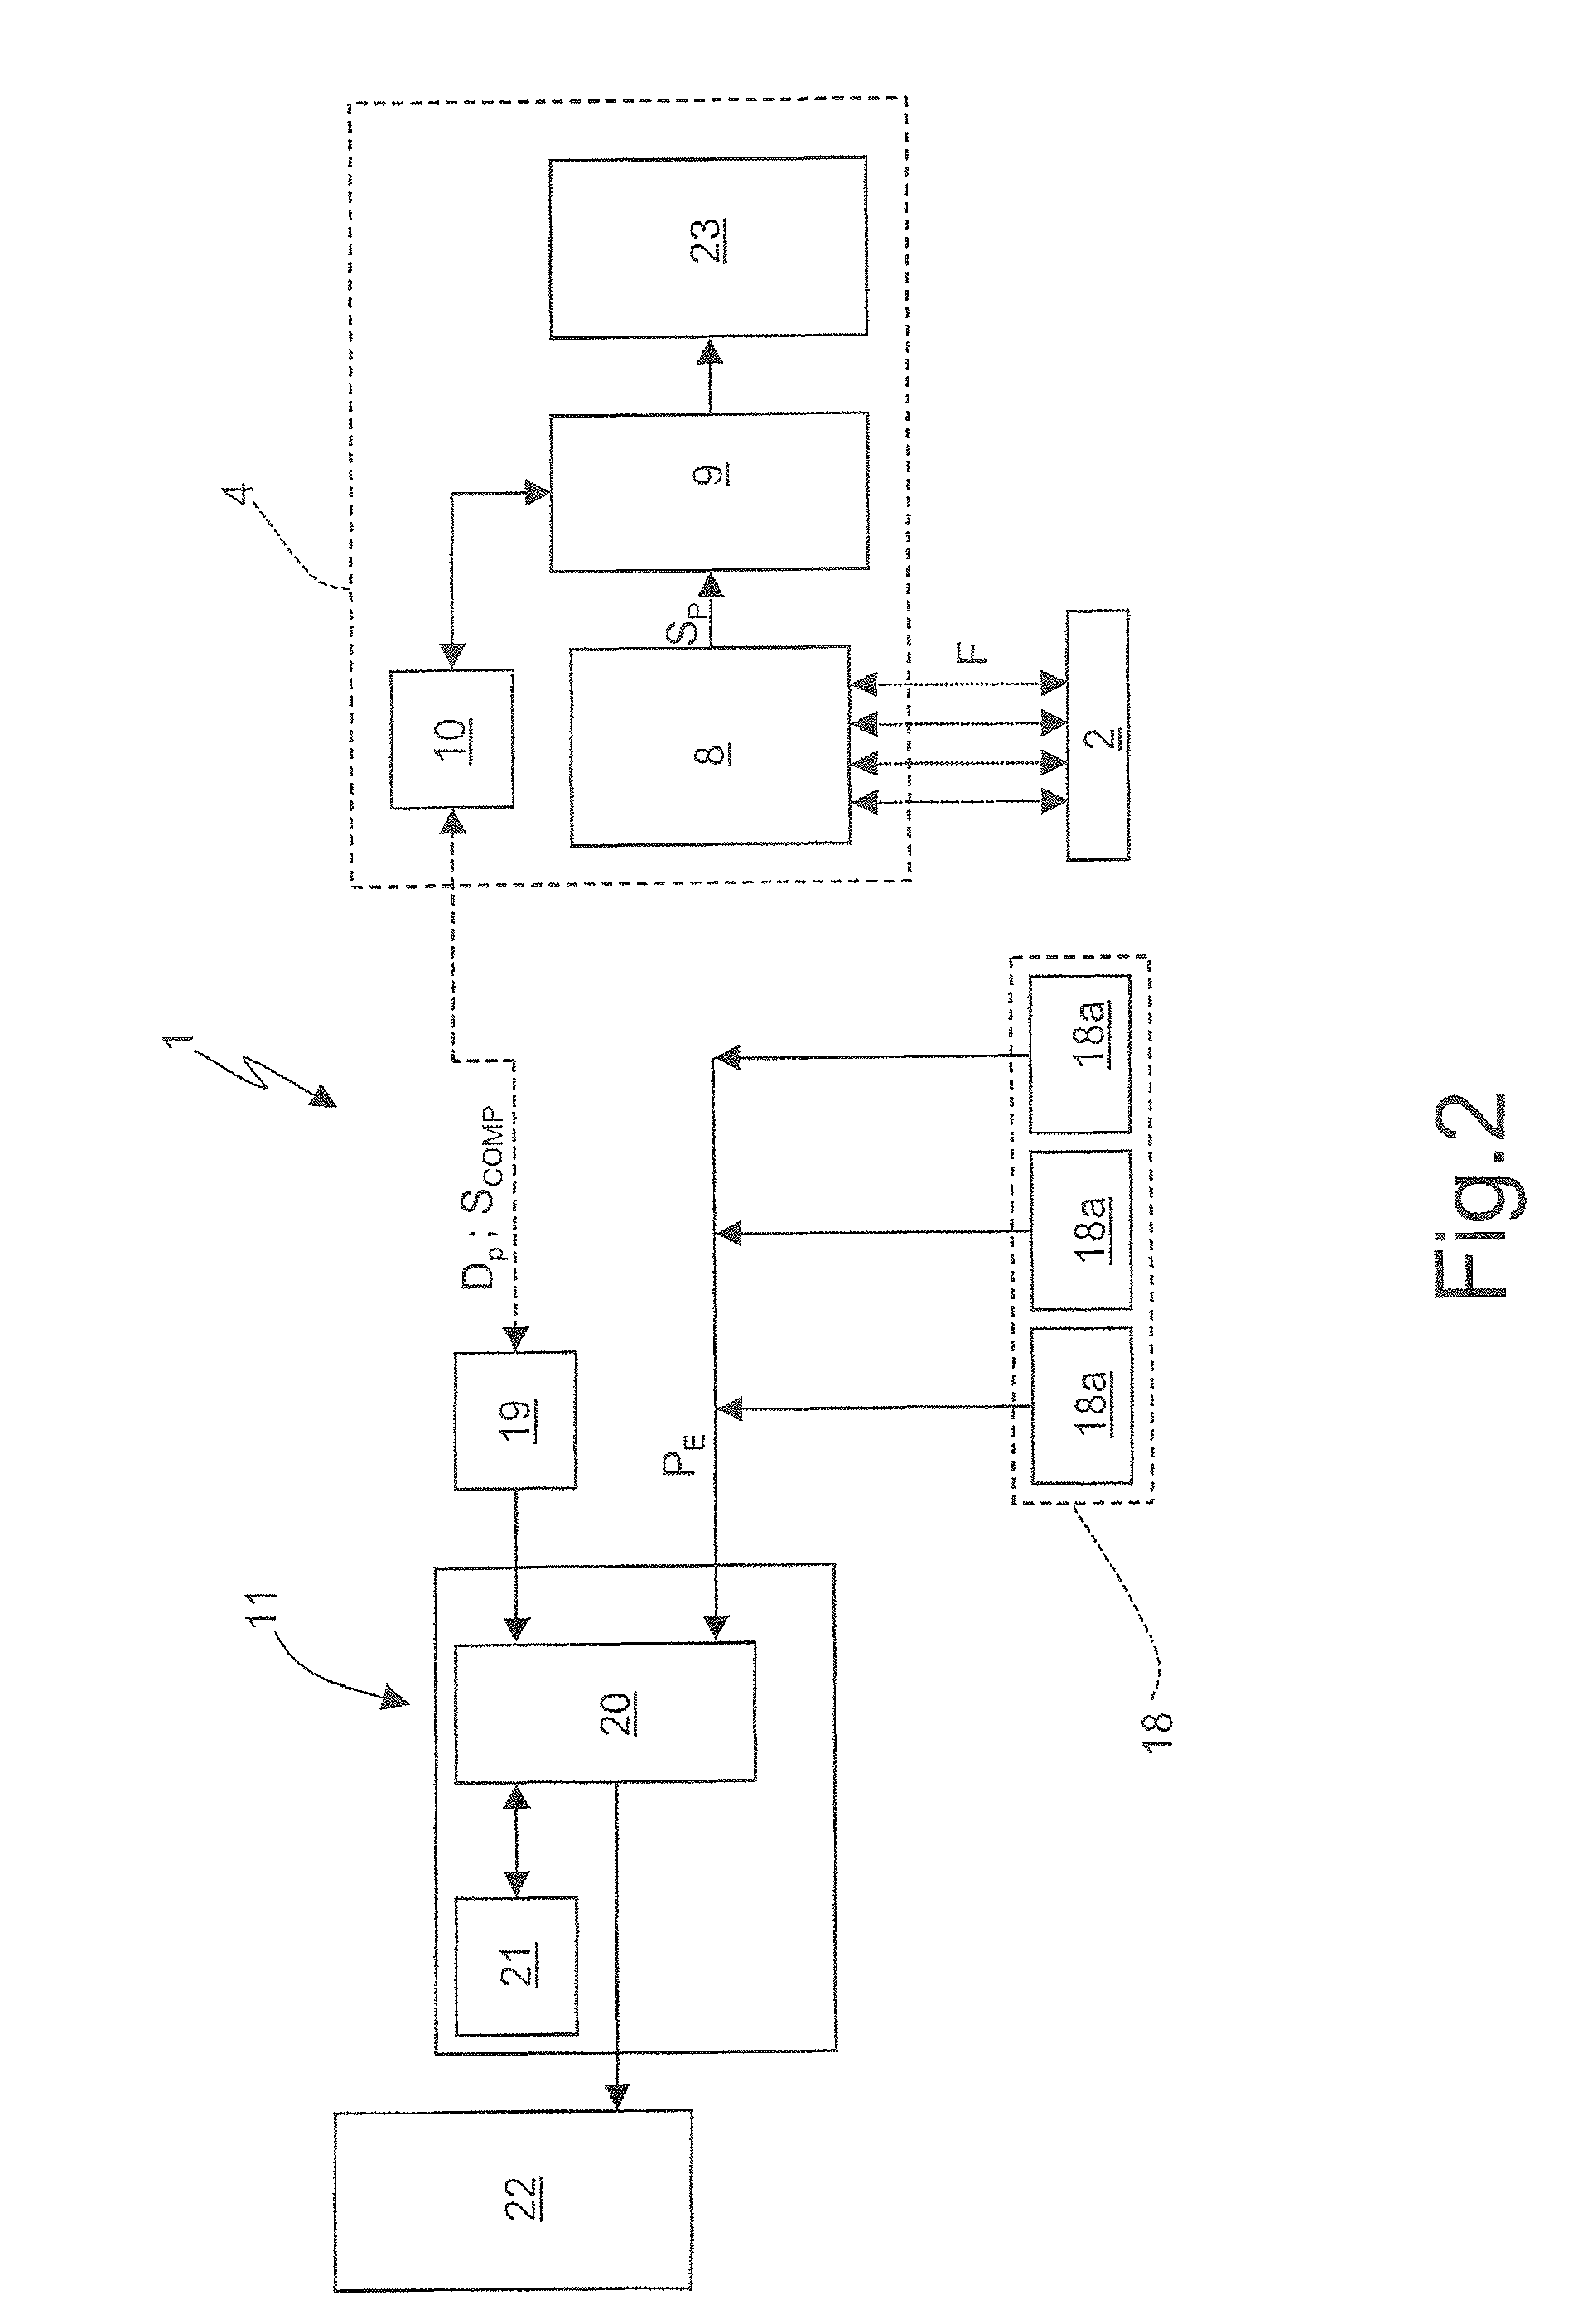 System for controlling the loading of one or more foods into a self-propelled mixing unit by means of a mechanical shovel mounted to a motor vehicle